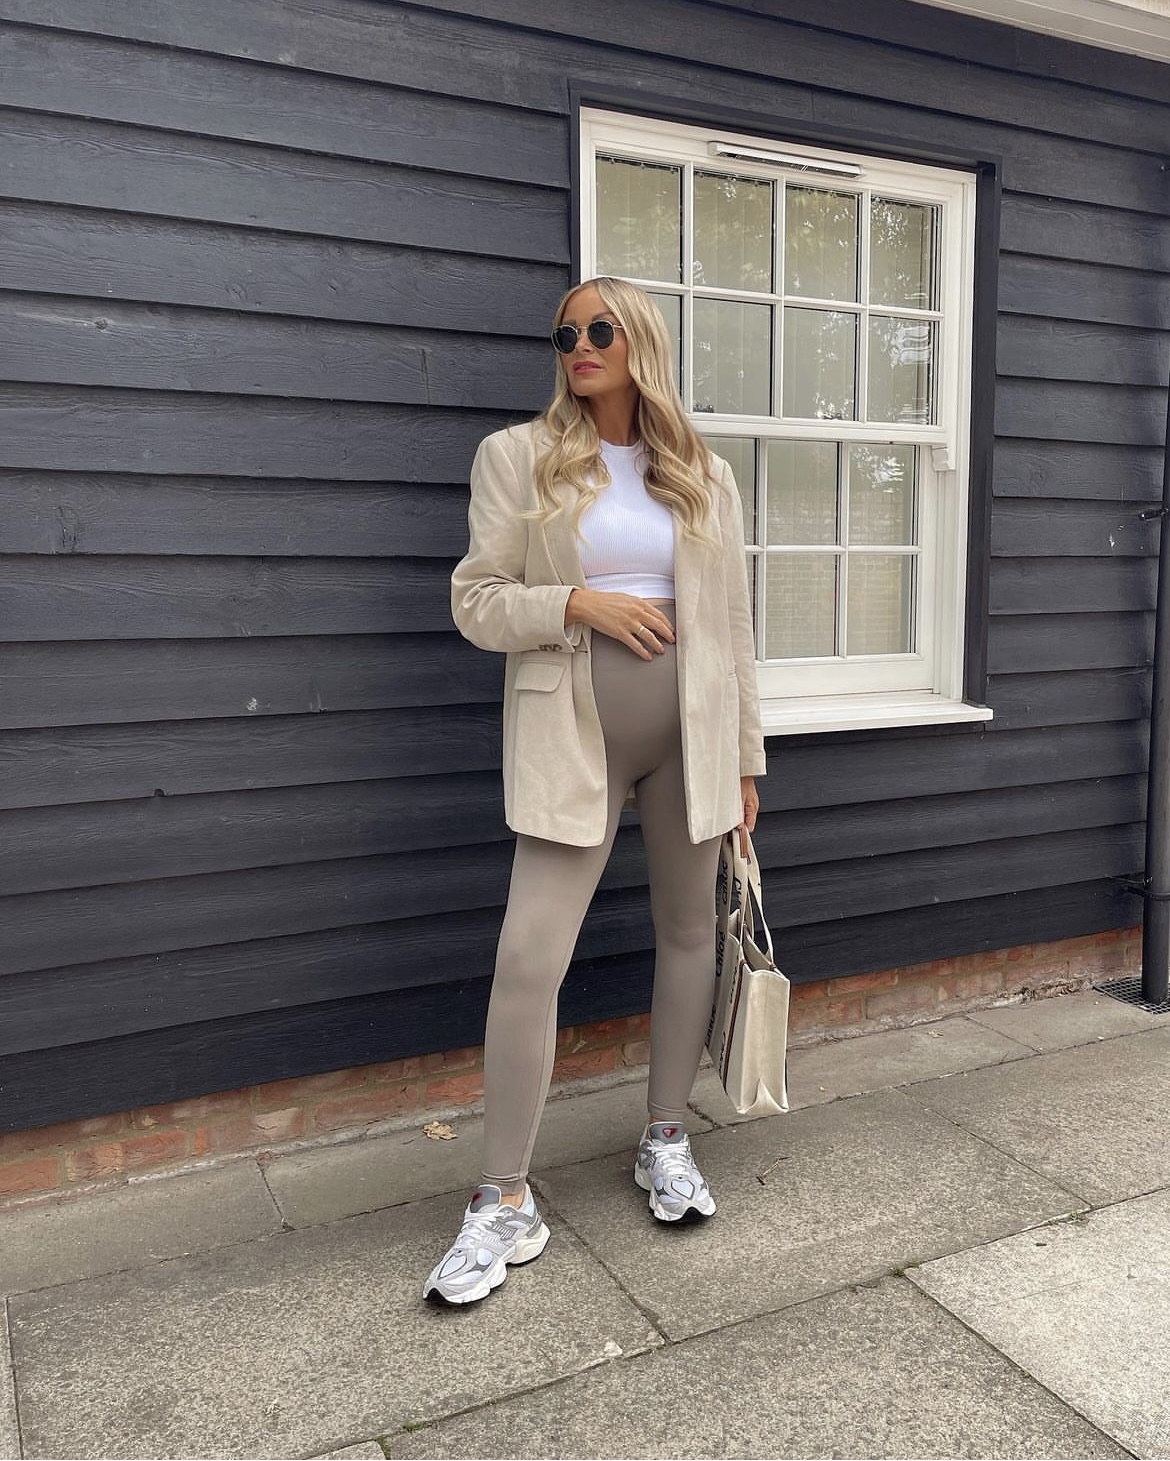 Maternity Wear for Winter - The Styled Press